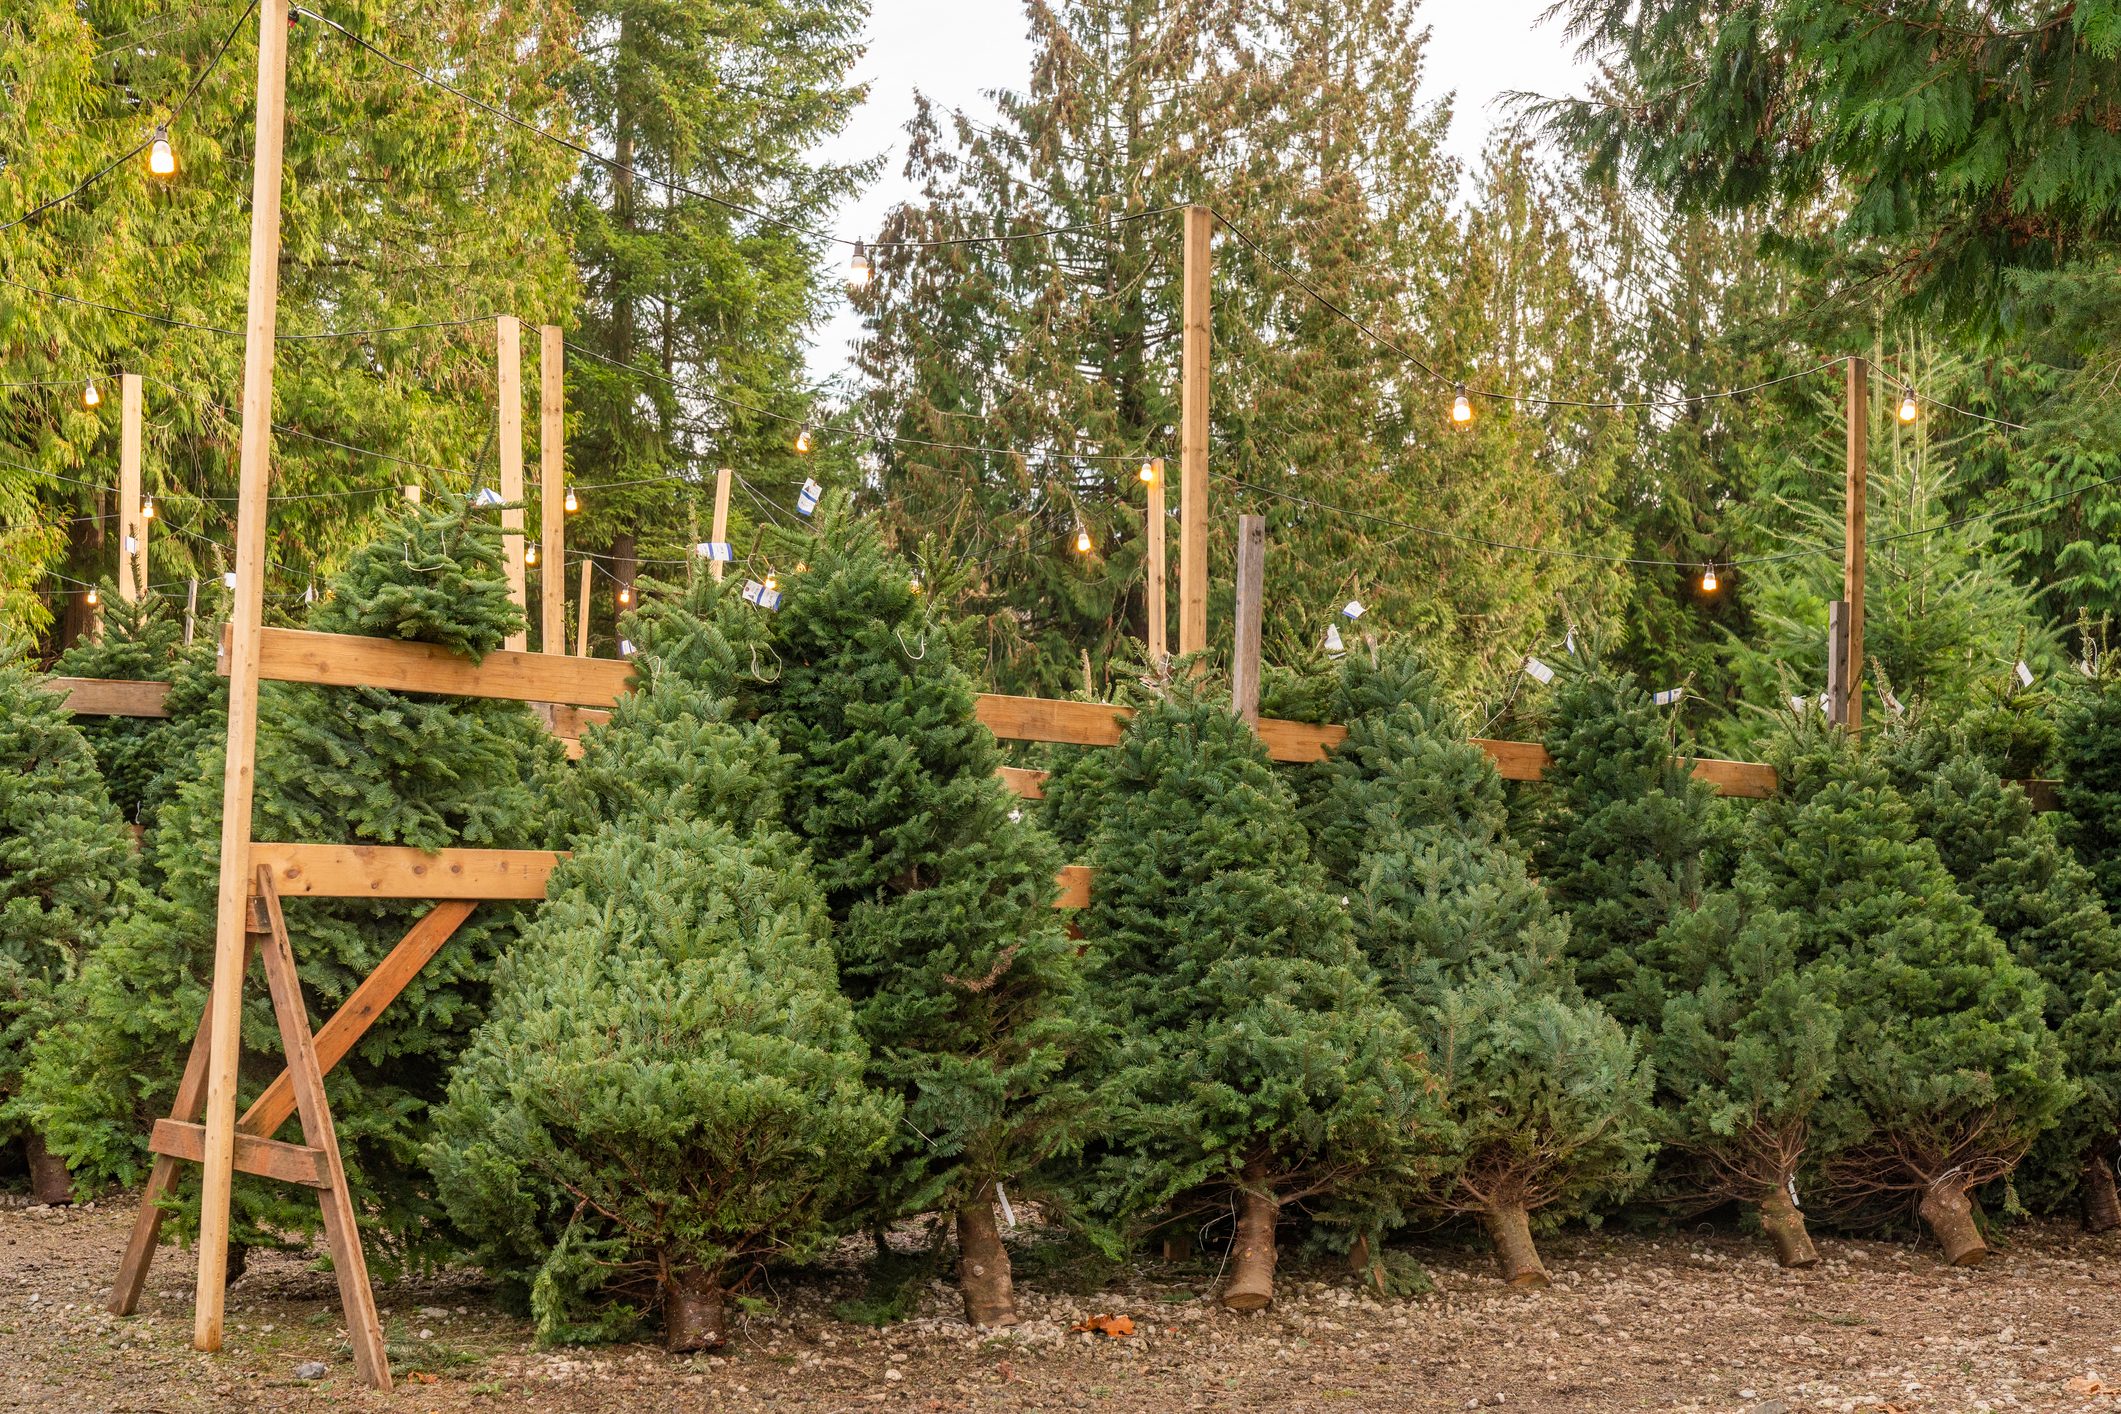 Christmas Tree Prices Are Going Up in 2022—Here's Why & How to Save